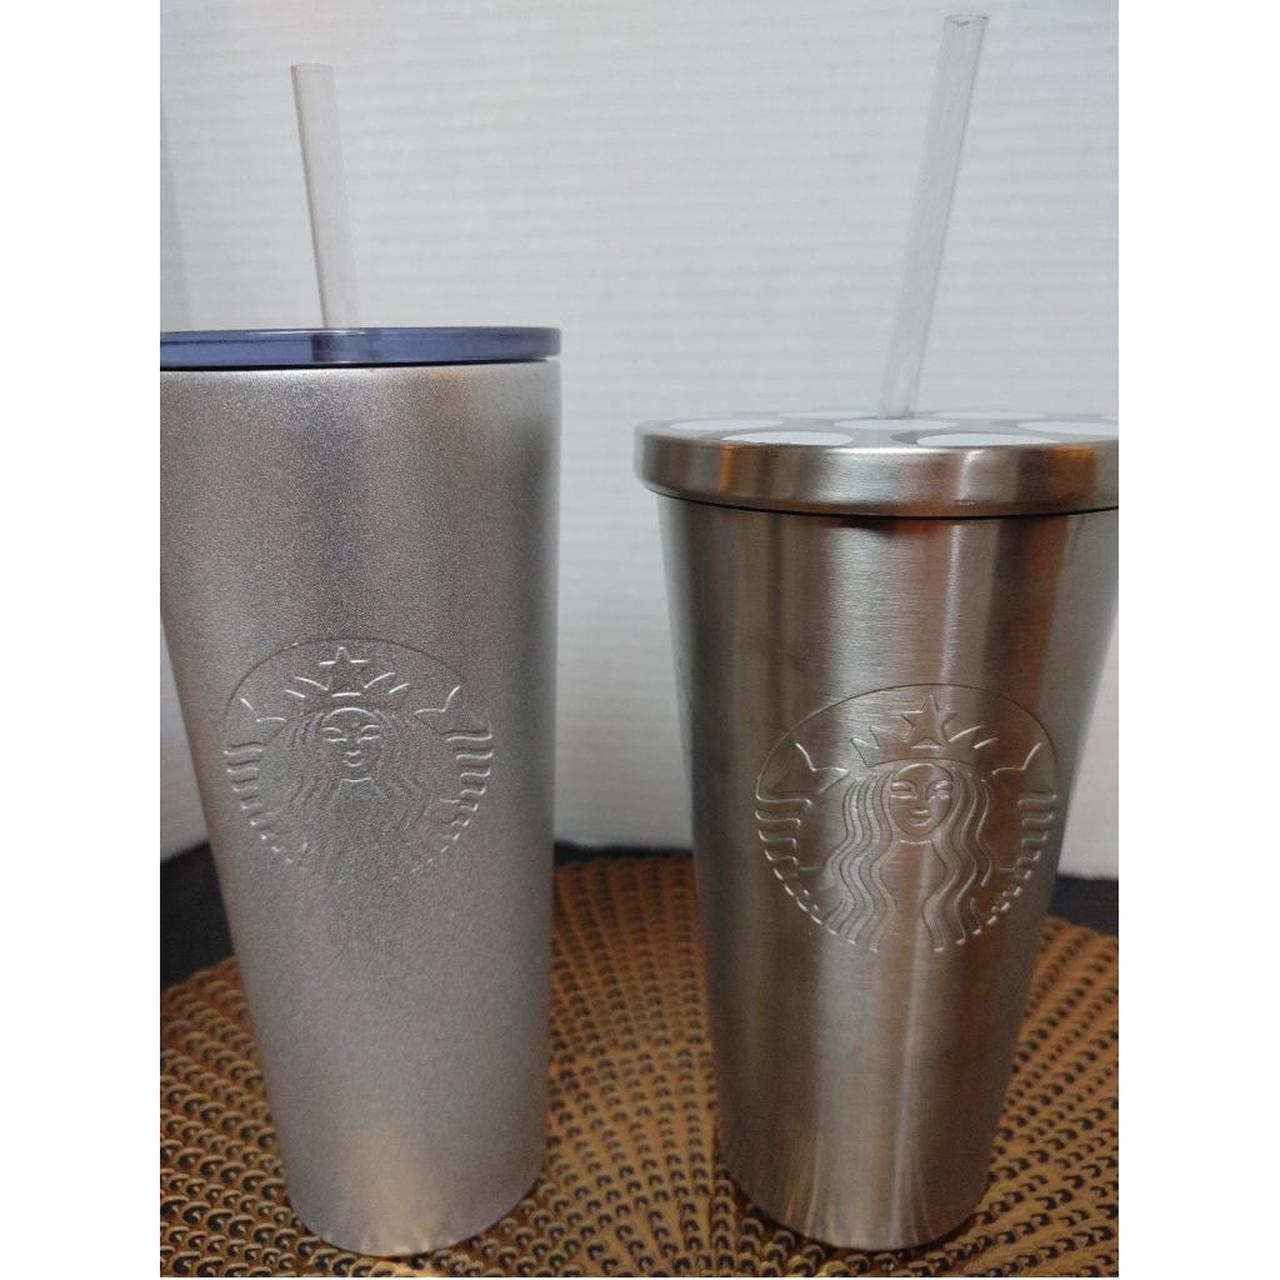 Starbucks stainless 24 oz water tumblers with straws - Depop